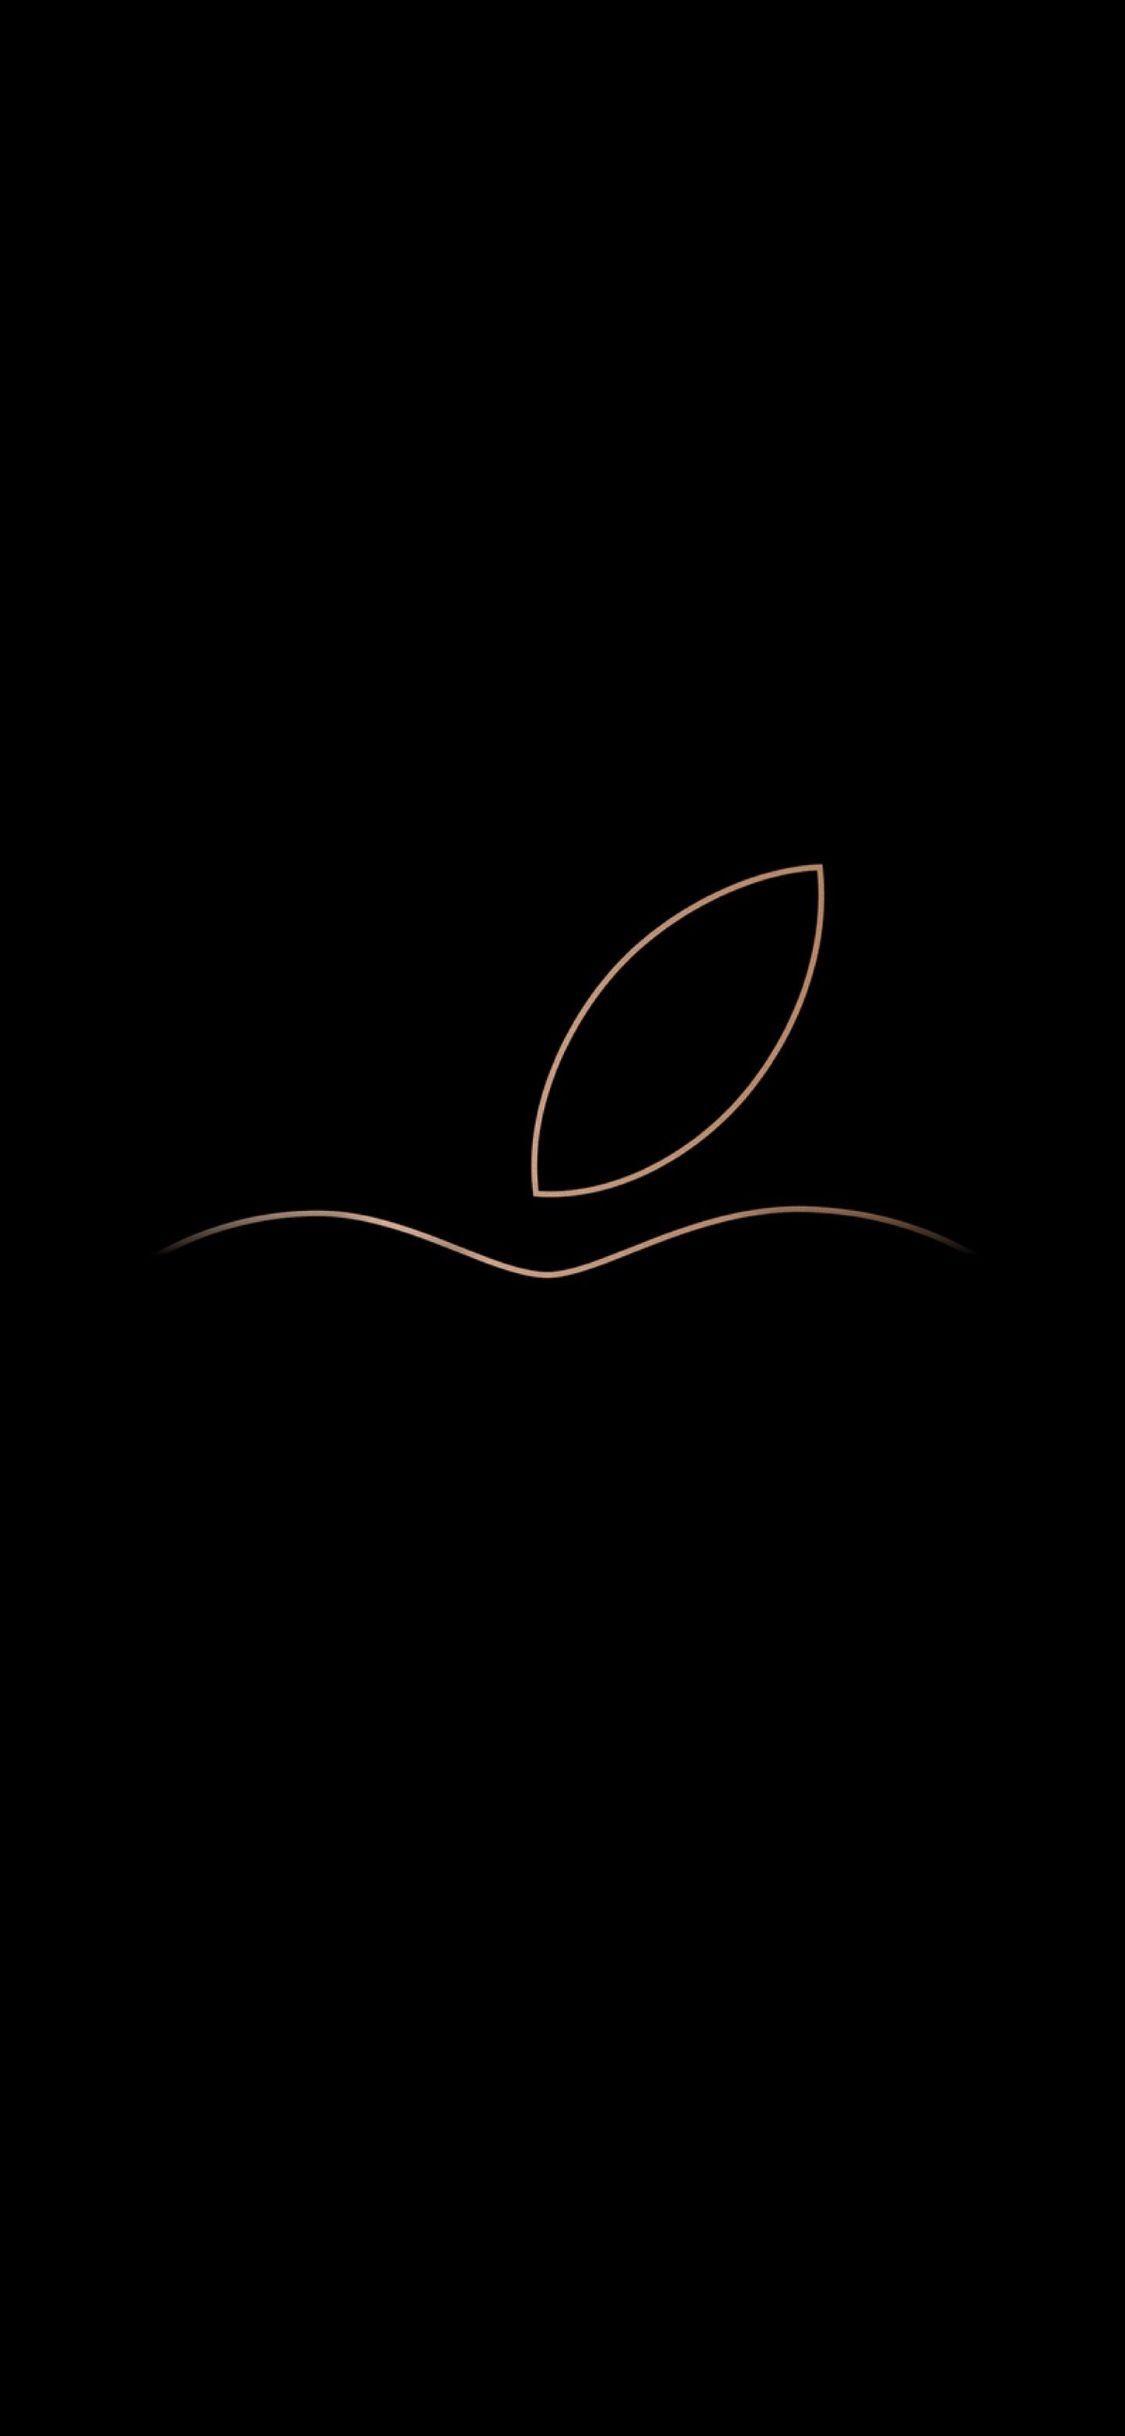 New Apple Logo Wallpapers - Top Free New Apple Logo Backgrounds ...